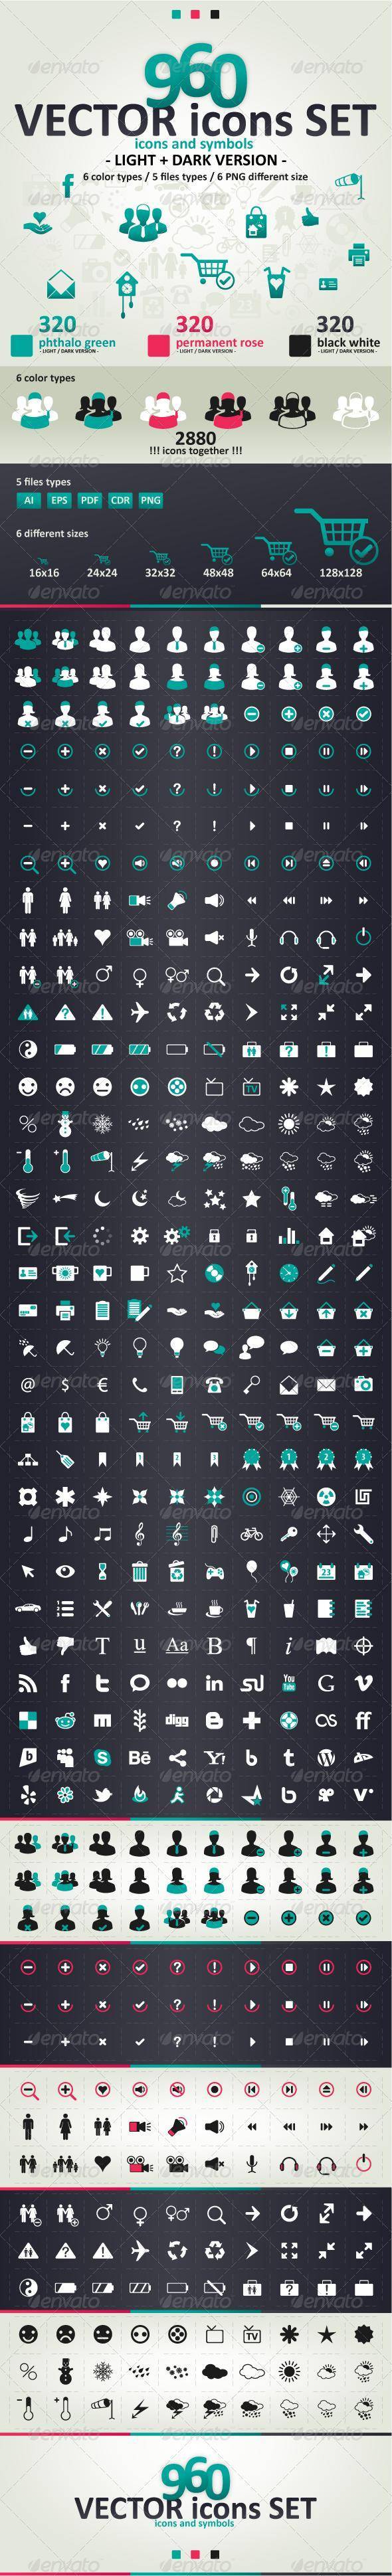 960 Vector Icons Set